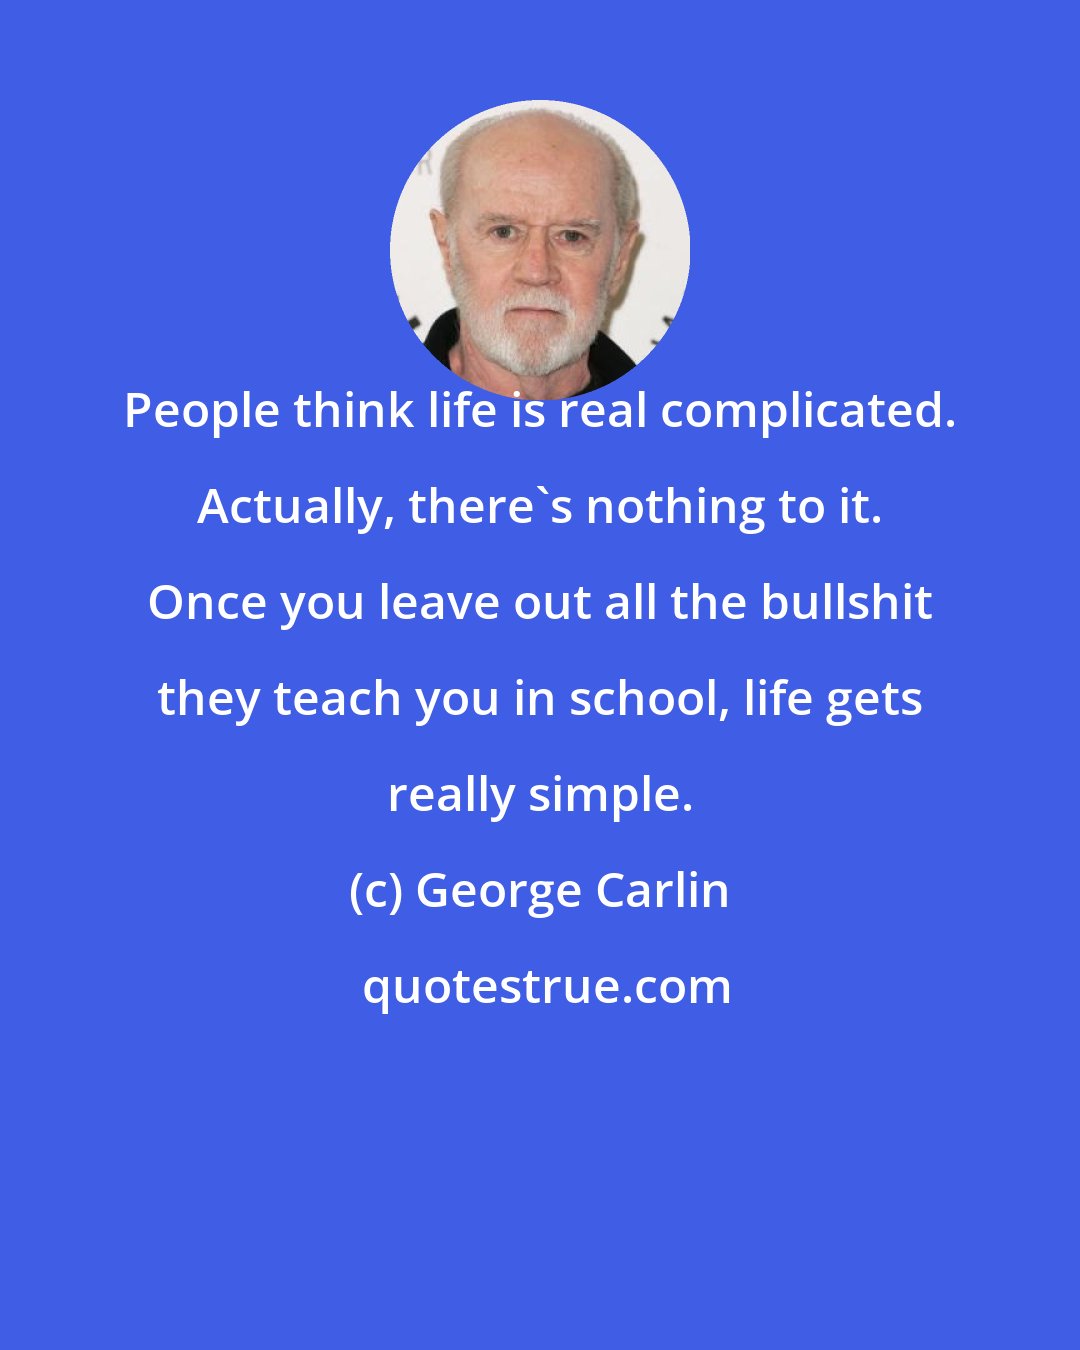 George Carlin: People think life is real complicated. Actually, there's nothing to it. Once you leave out all the bullshit they teach you in school, life gets really simple.